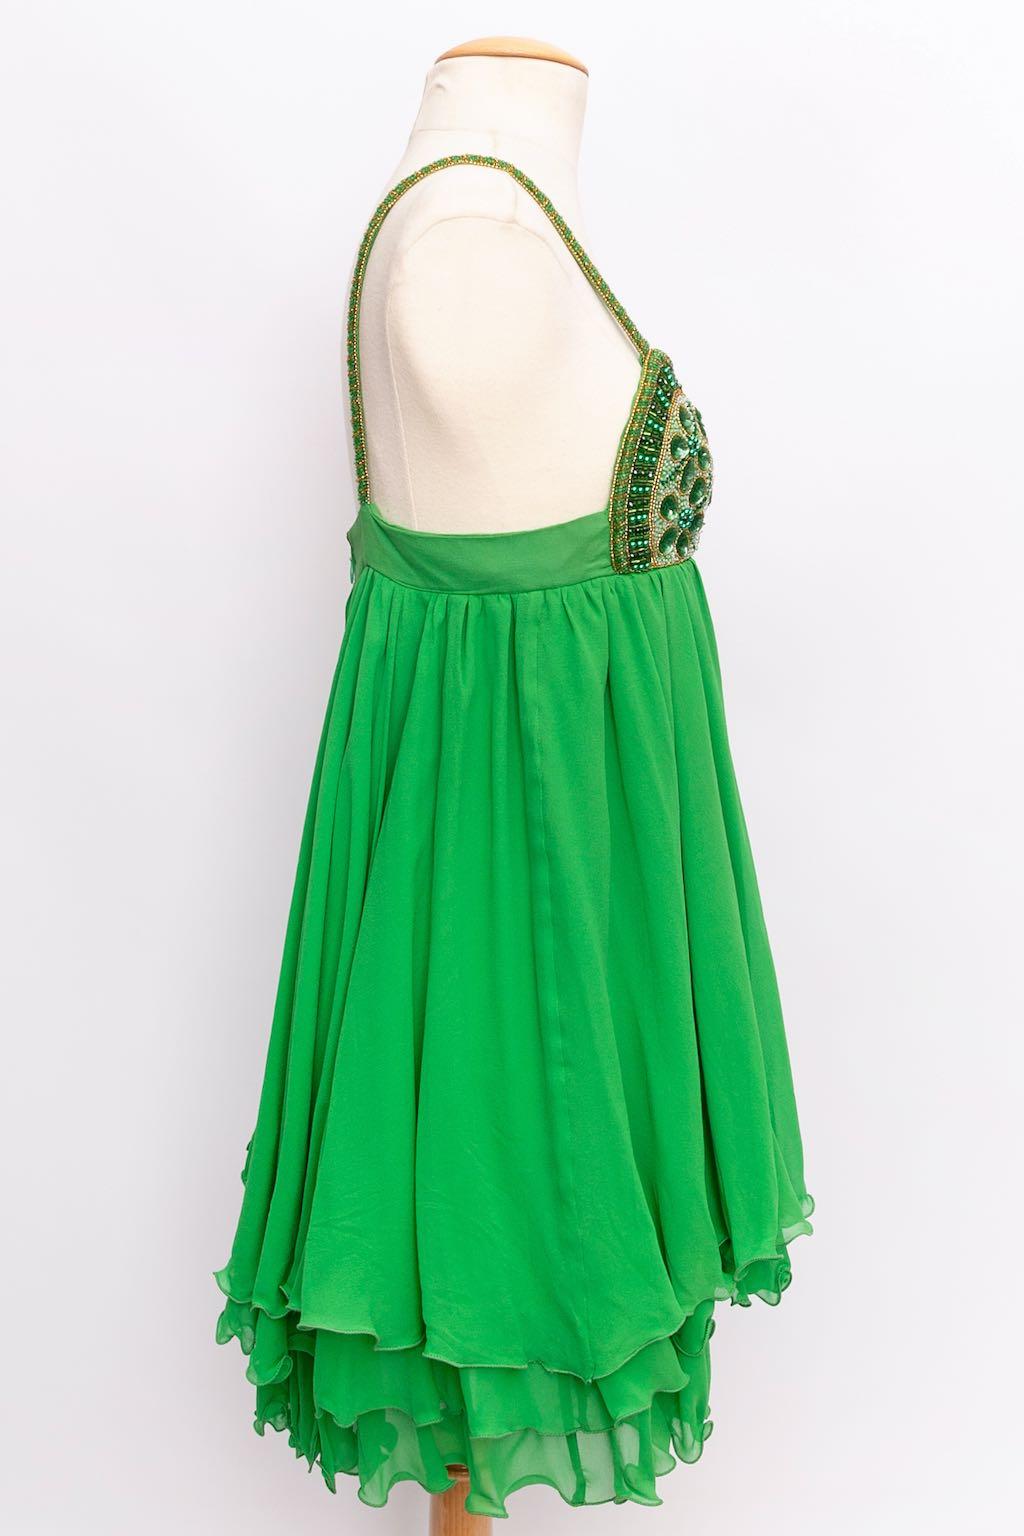 Women's Serge Lepage Skater Dress in Silk Chiffon Embroidered with Pearly Beads For Sale